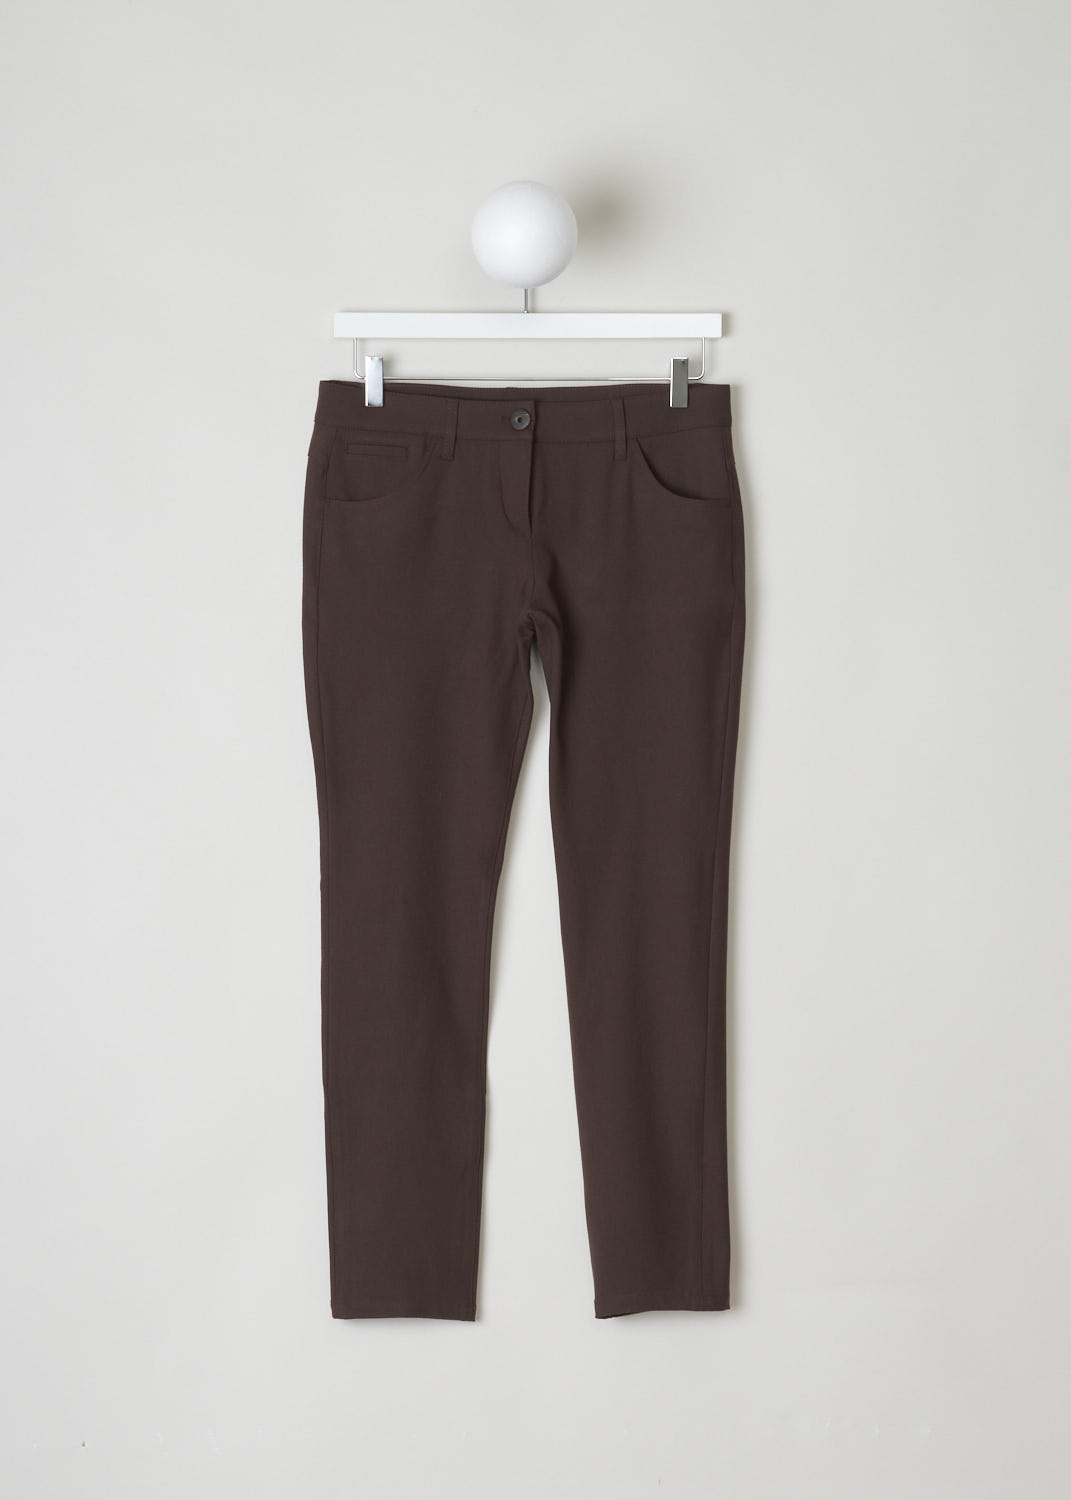 BRUNELLO CUCINELLI, BROWN WOOL PANTS, M0L15P1790_C2630, Brown, Front, Form fitting brown pants made with a wool blend. These pants have a waistband with belt loops. The closure option on these pants is a single button and a concealed zipper. These pants have a traditional five pocket configuration, meaning in the front there are two rounded pockets and a single coin pocket, and two pockets in the back.
